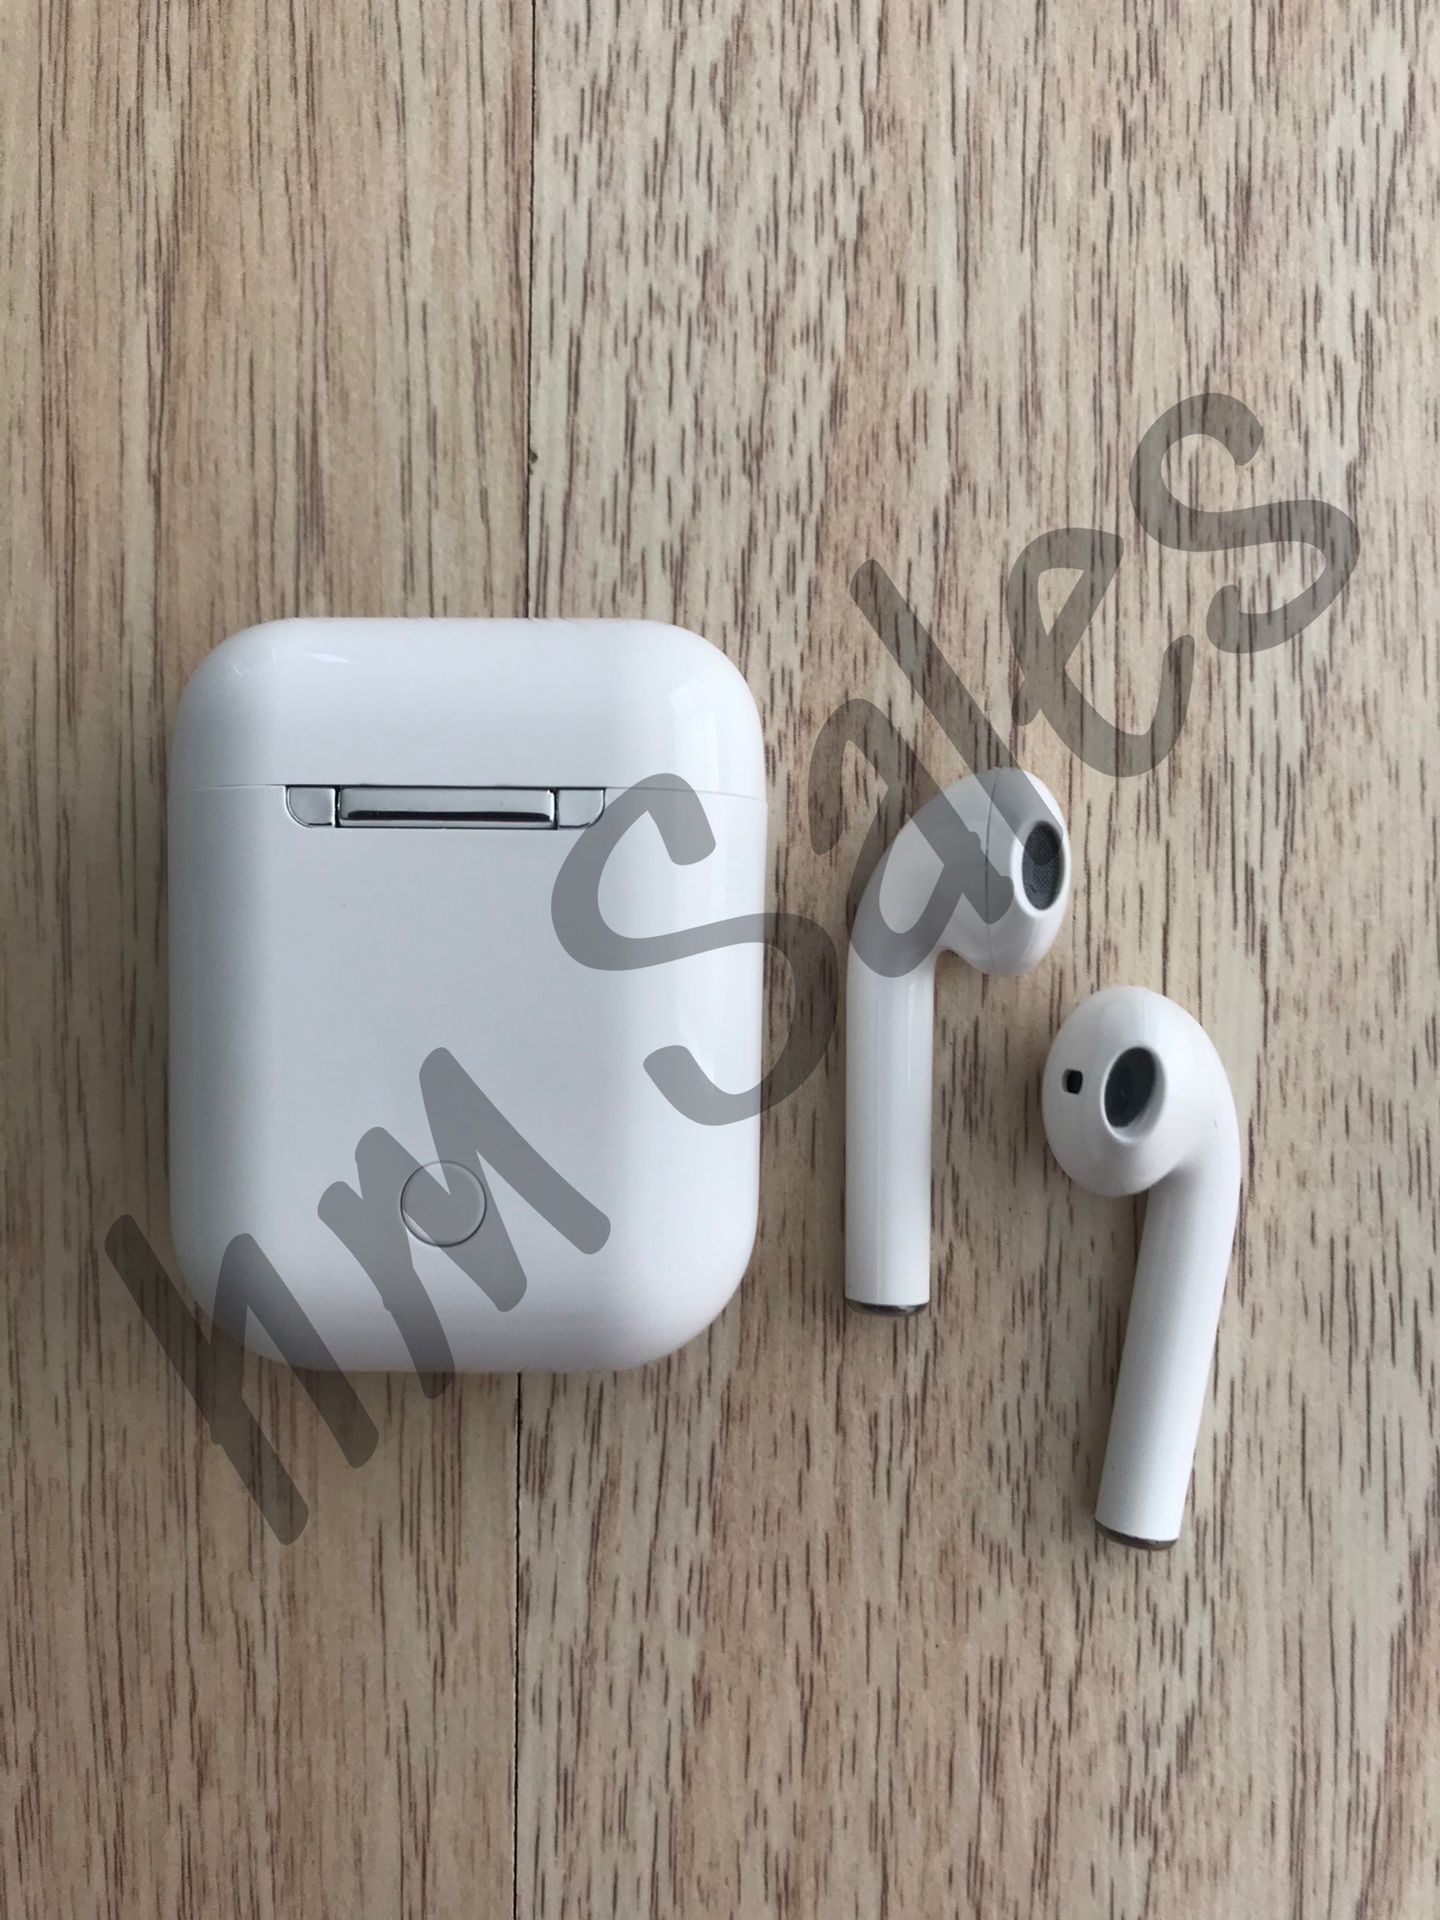 Brand New Sealed i12 TWS Airpods Style Earbuds